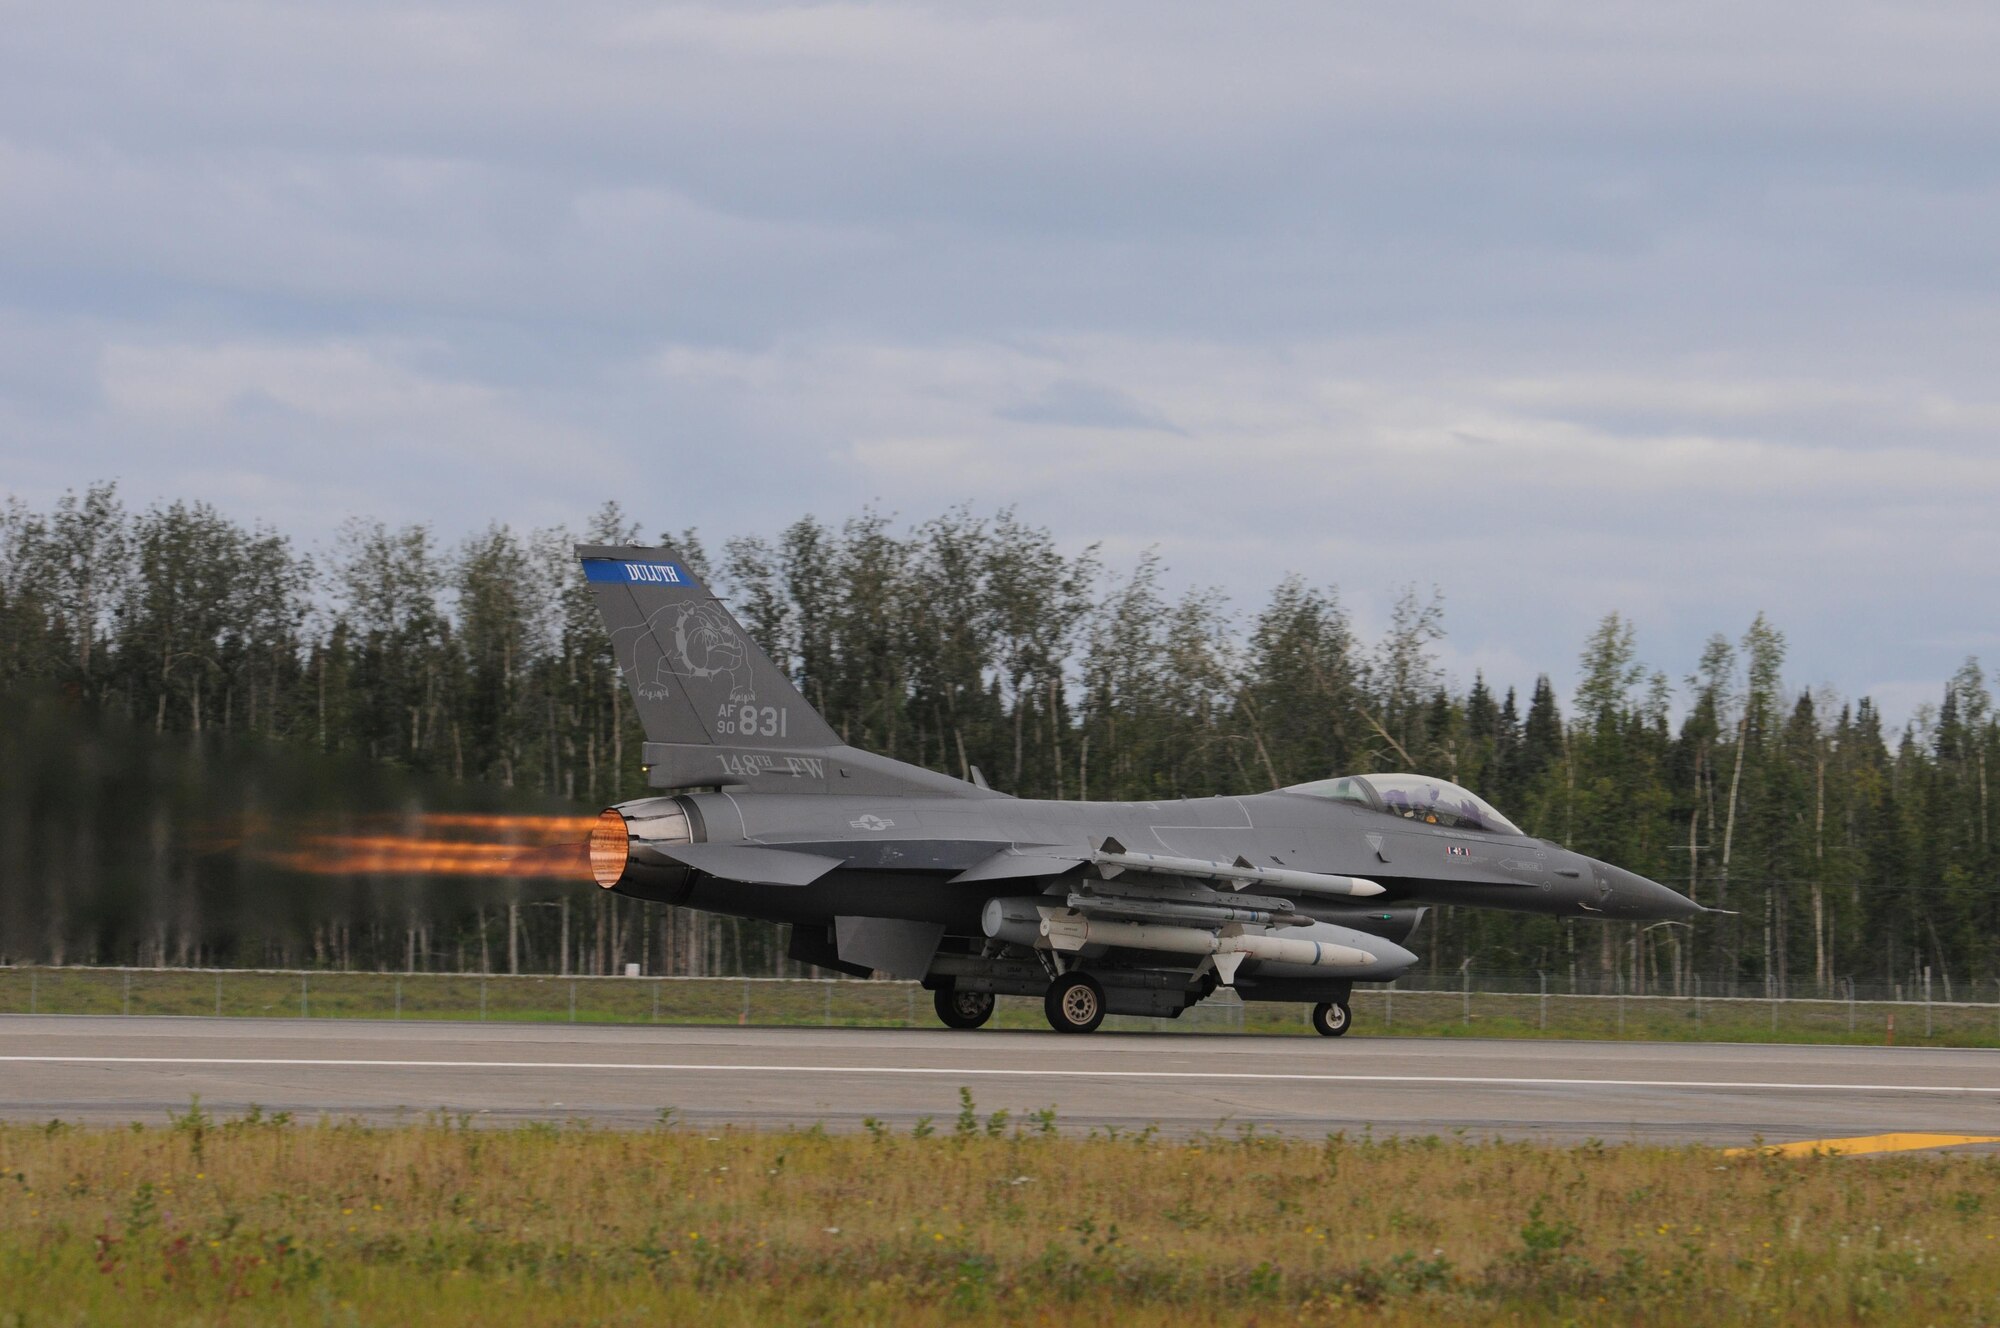 A U.S. Air Force F-16 Fighting Falcon from the 148th Fighter Wing, Duluth, Minn., takes-off at Eielson Air Force Base, Alaska, Aug. 11, 2015, during RED FLAG-Alaska 15-3.  RF-A is a Pacific Air Forces commander-directed field training exercise for U.S. and partner nation forces, providing combined offensive counter-air, interdiction, close air support and large force employment training in a simulated combat environment.  (U.S. Air Force photo by Master Sgt. Ralph Kapustka/Released)